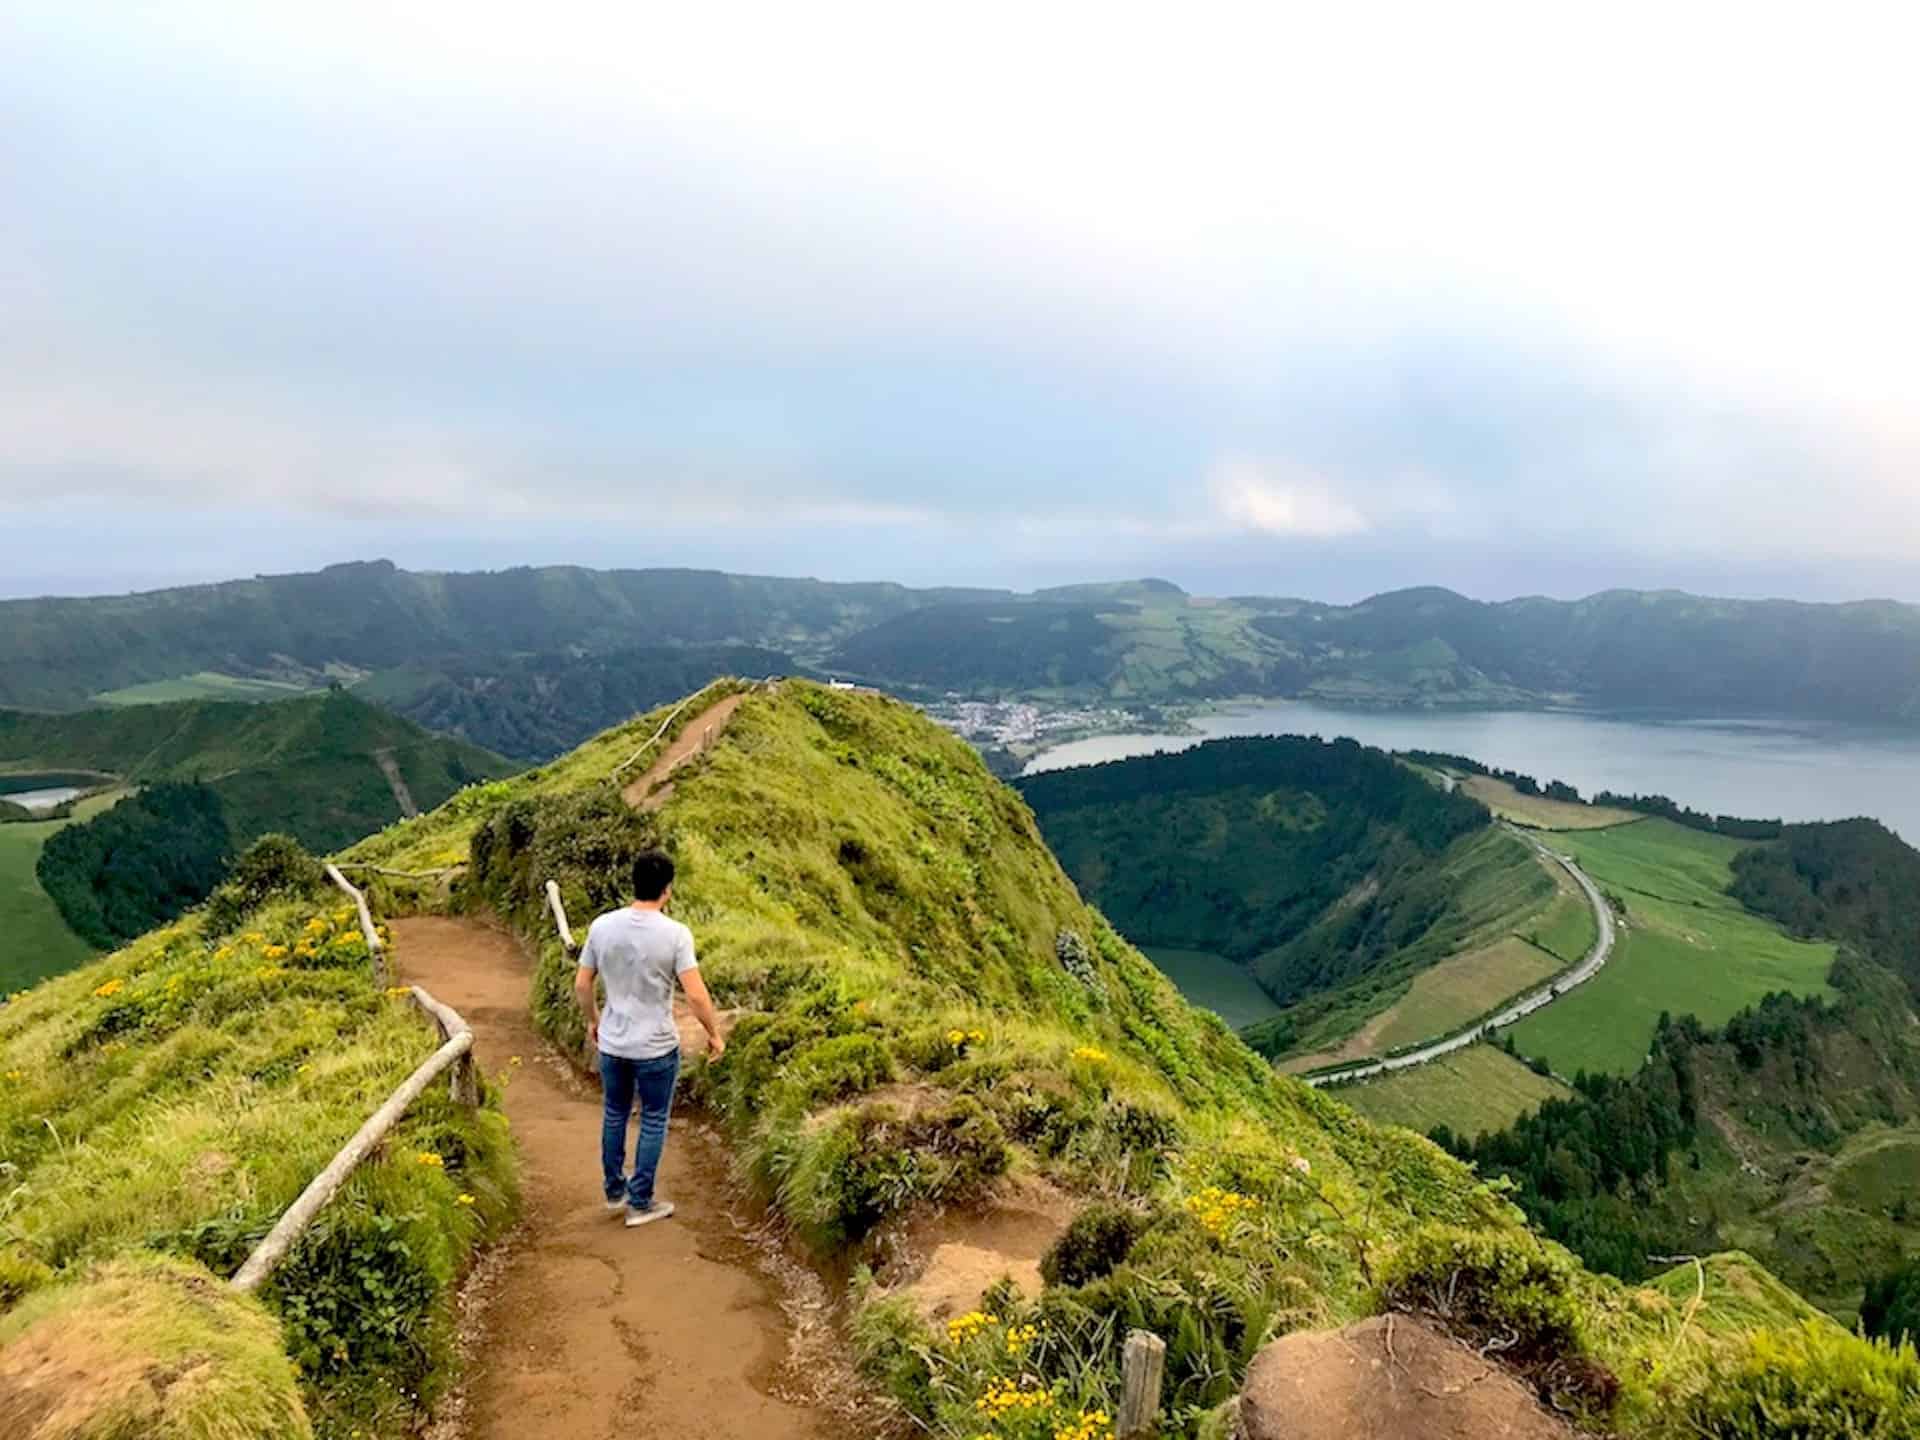 18 Helpful Azores Travel Tips